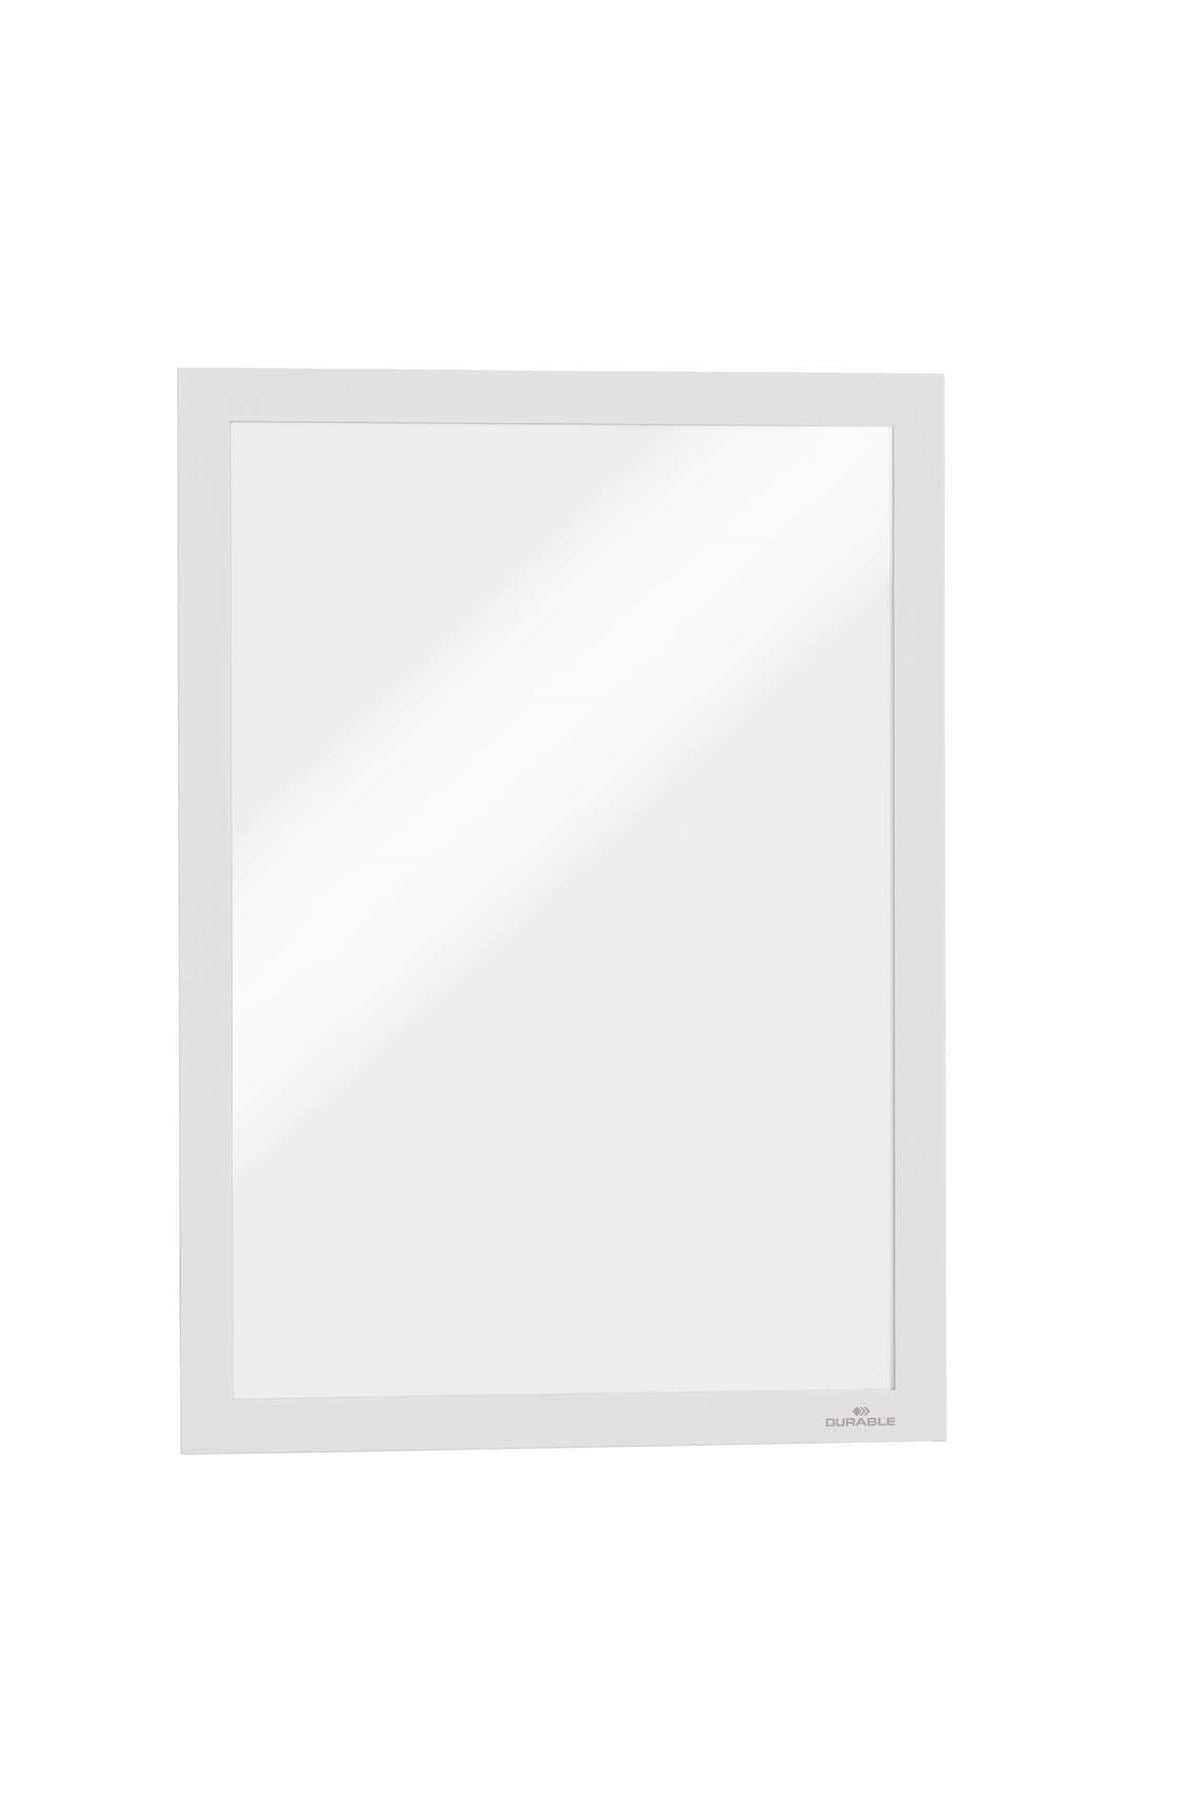 Durable DURAFRAME Self Adhesive Magnetic Signage Frame | 2 Pack | A4 White